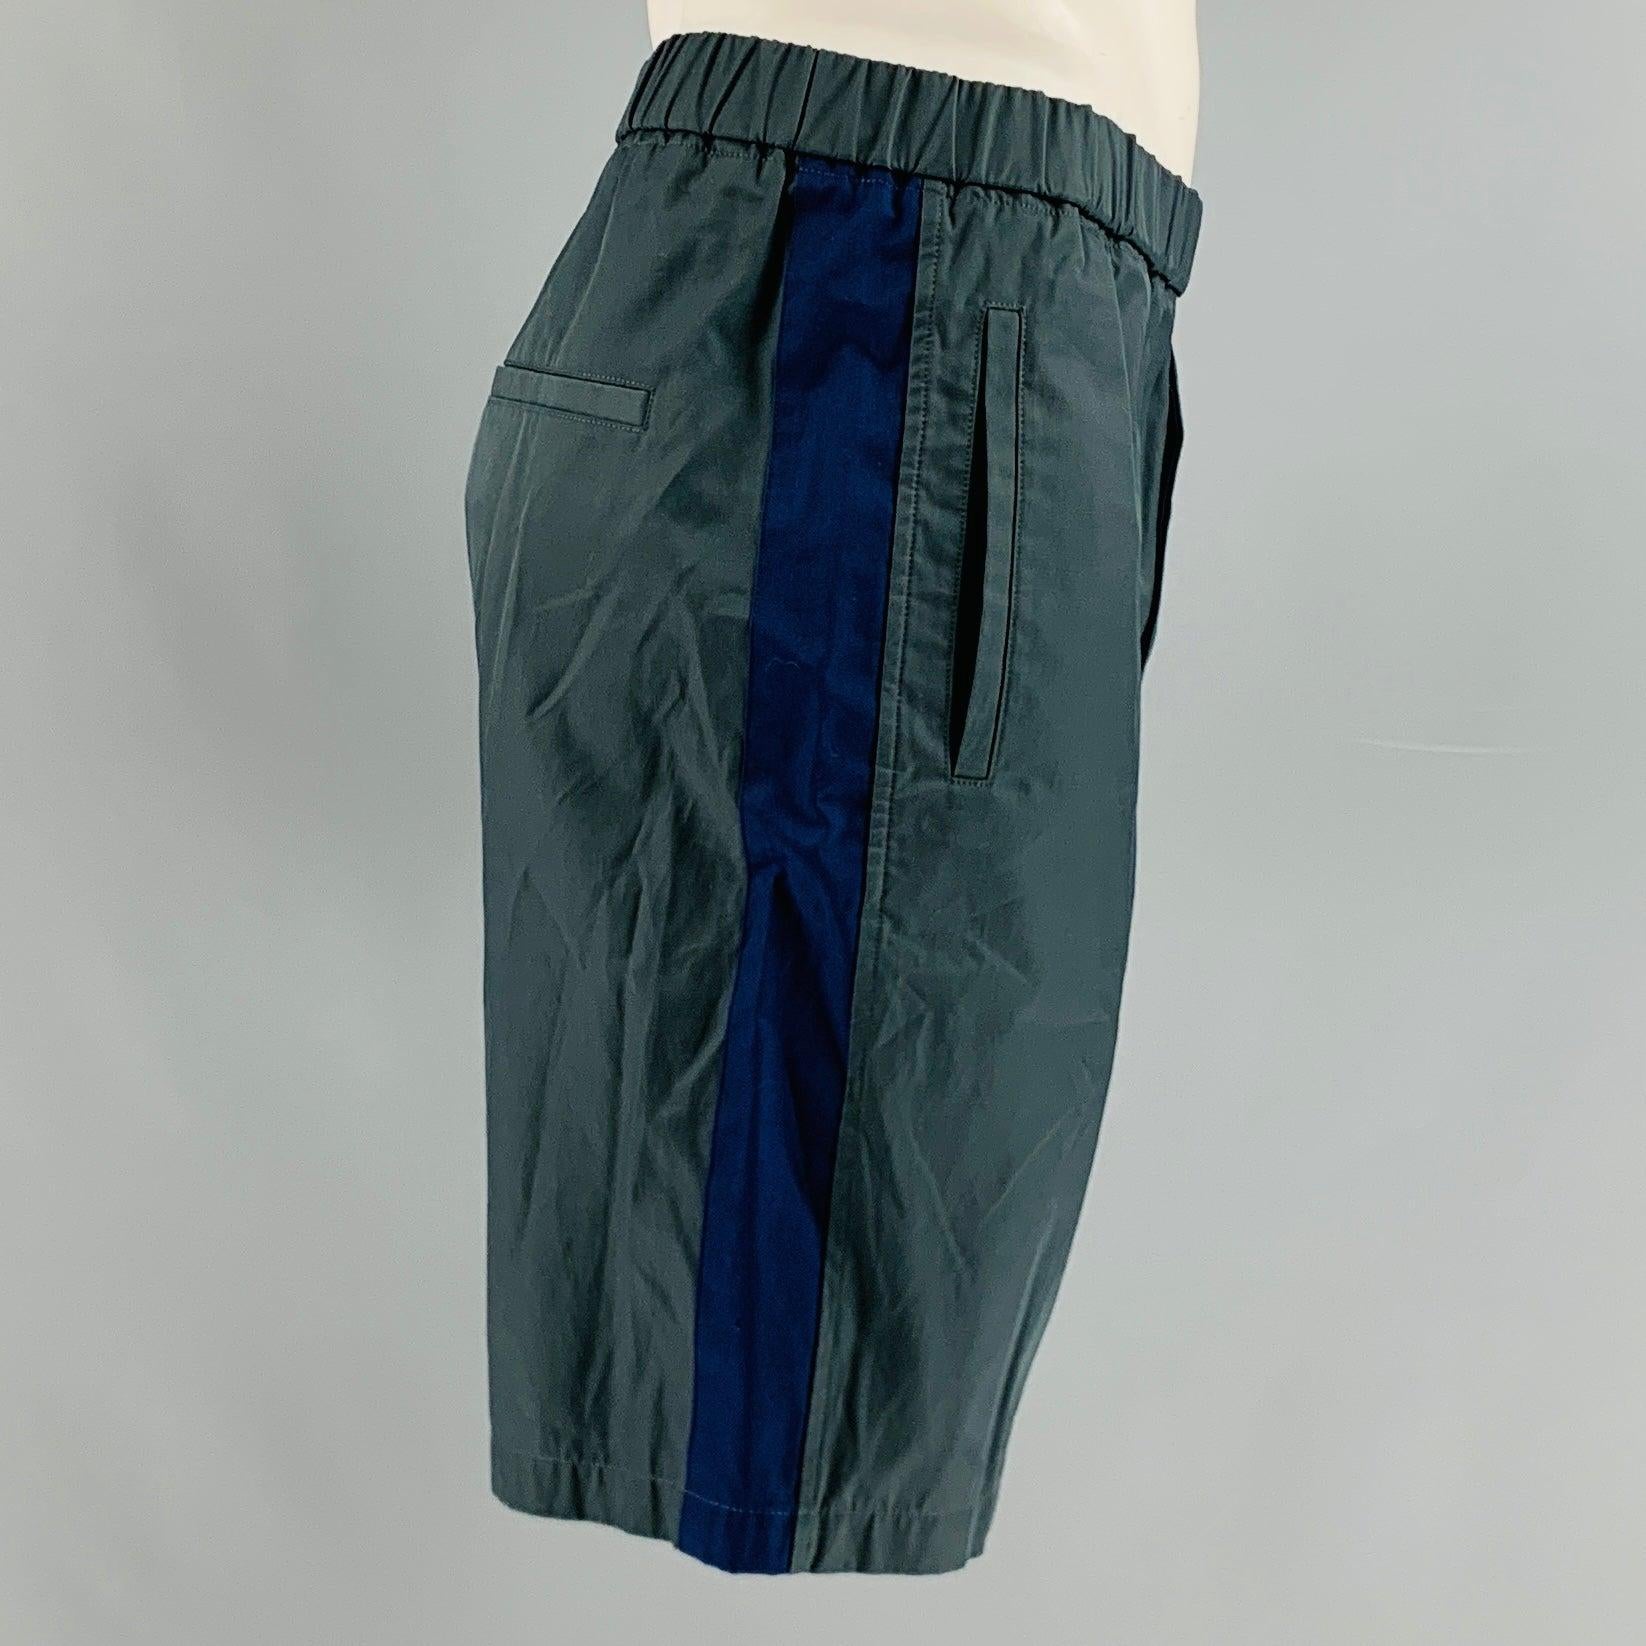 MARNI shorts comes in a grey and blue cotton blend featuring a vertical stripe at side seam, front pockets, and elastic waistband..
Excellent Pre-Owned Condition. 

Marked:   50 

Measurements: 
  Waist: 34 inches Rise: 10 inches Inseam: 8.5 inches 